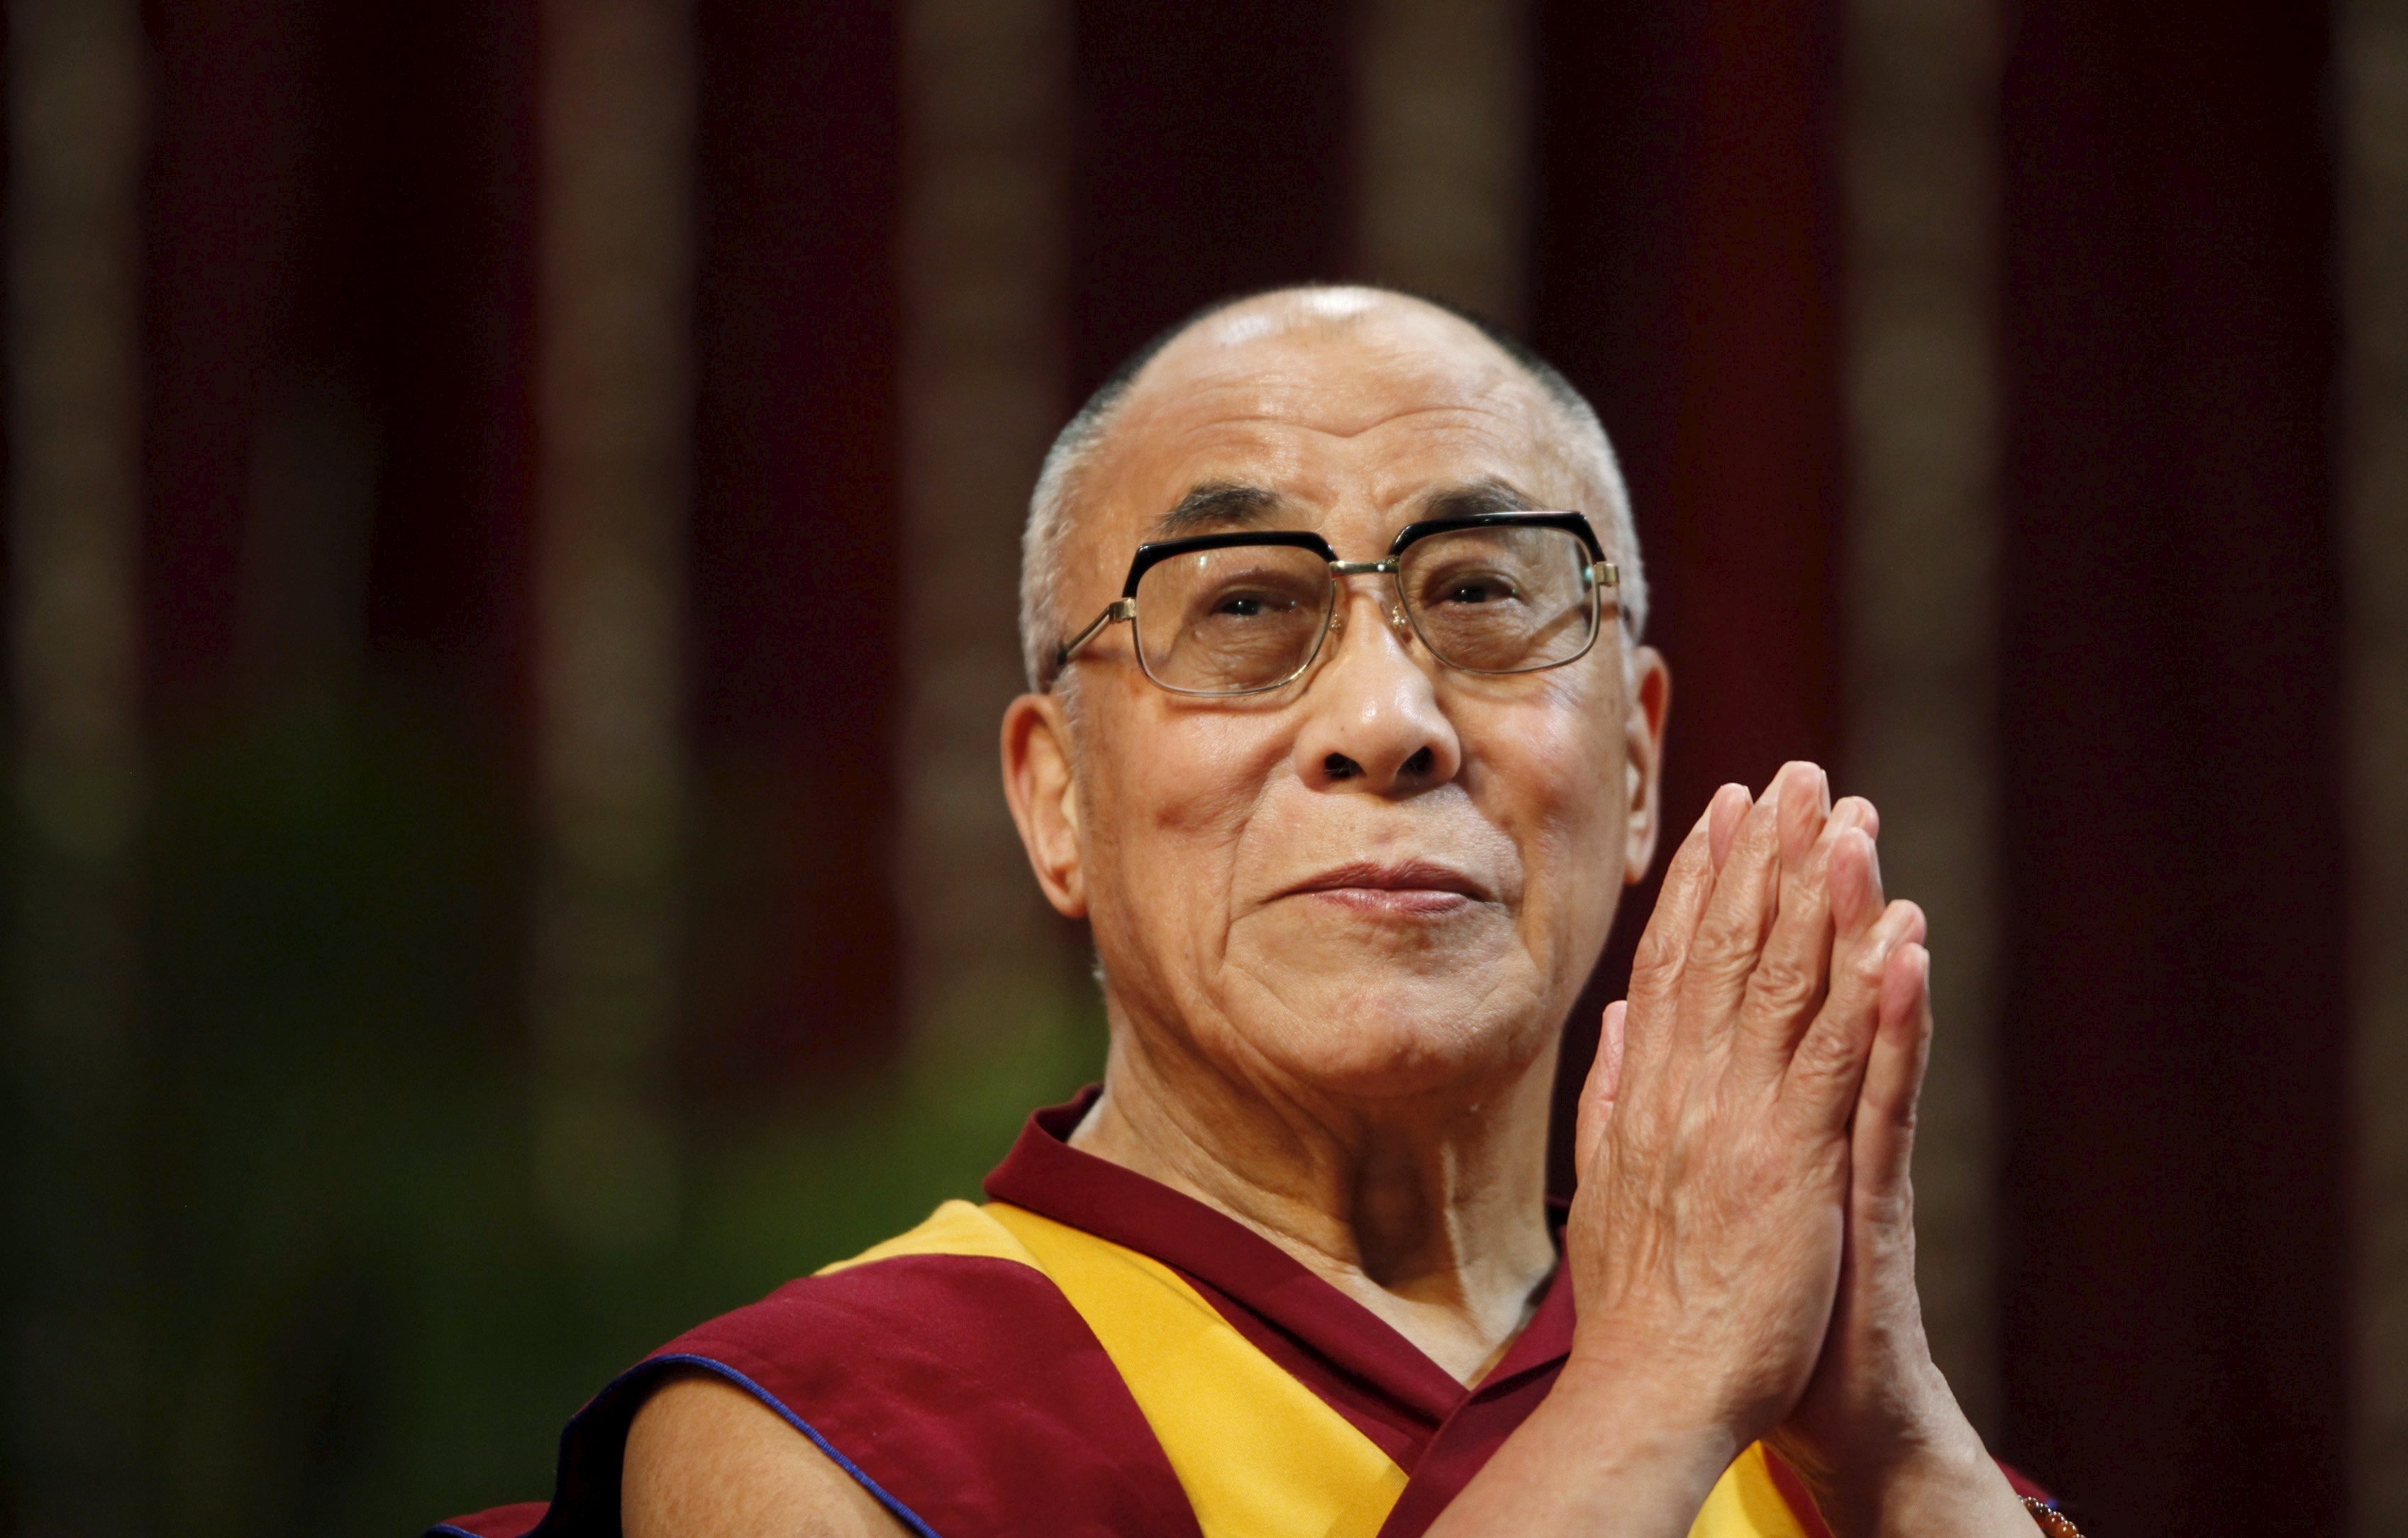 The Dalai Lama must make his peace with an antithetical political authority and persevere in good faith. Photo: Reuters